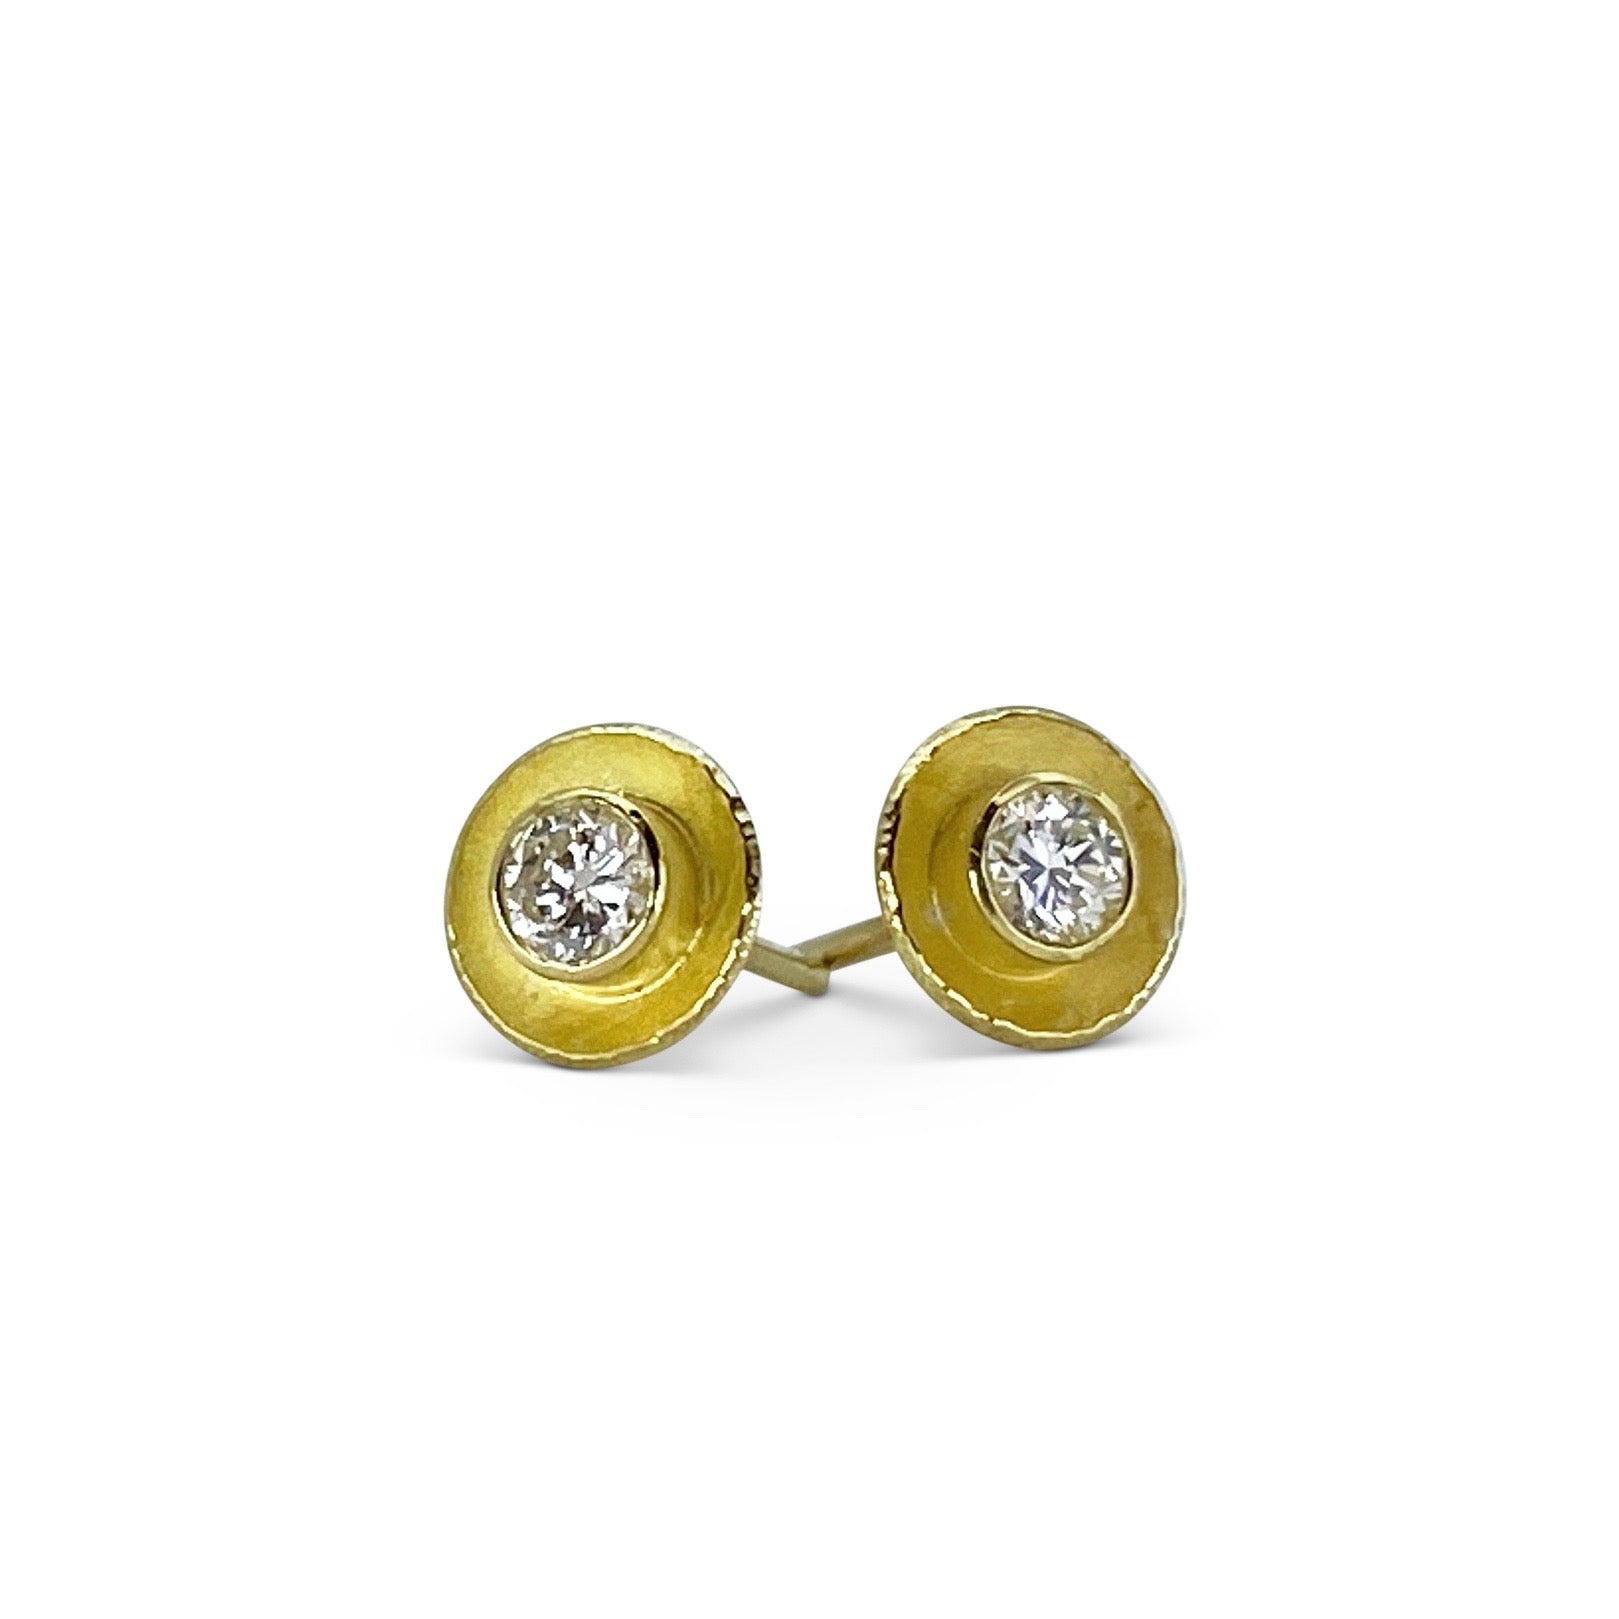 Petite concave sphere earrings in 18K yellow gold with diamonds